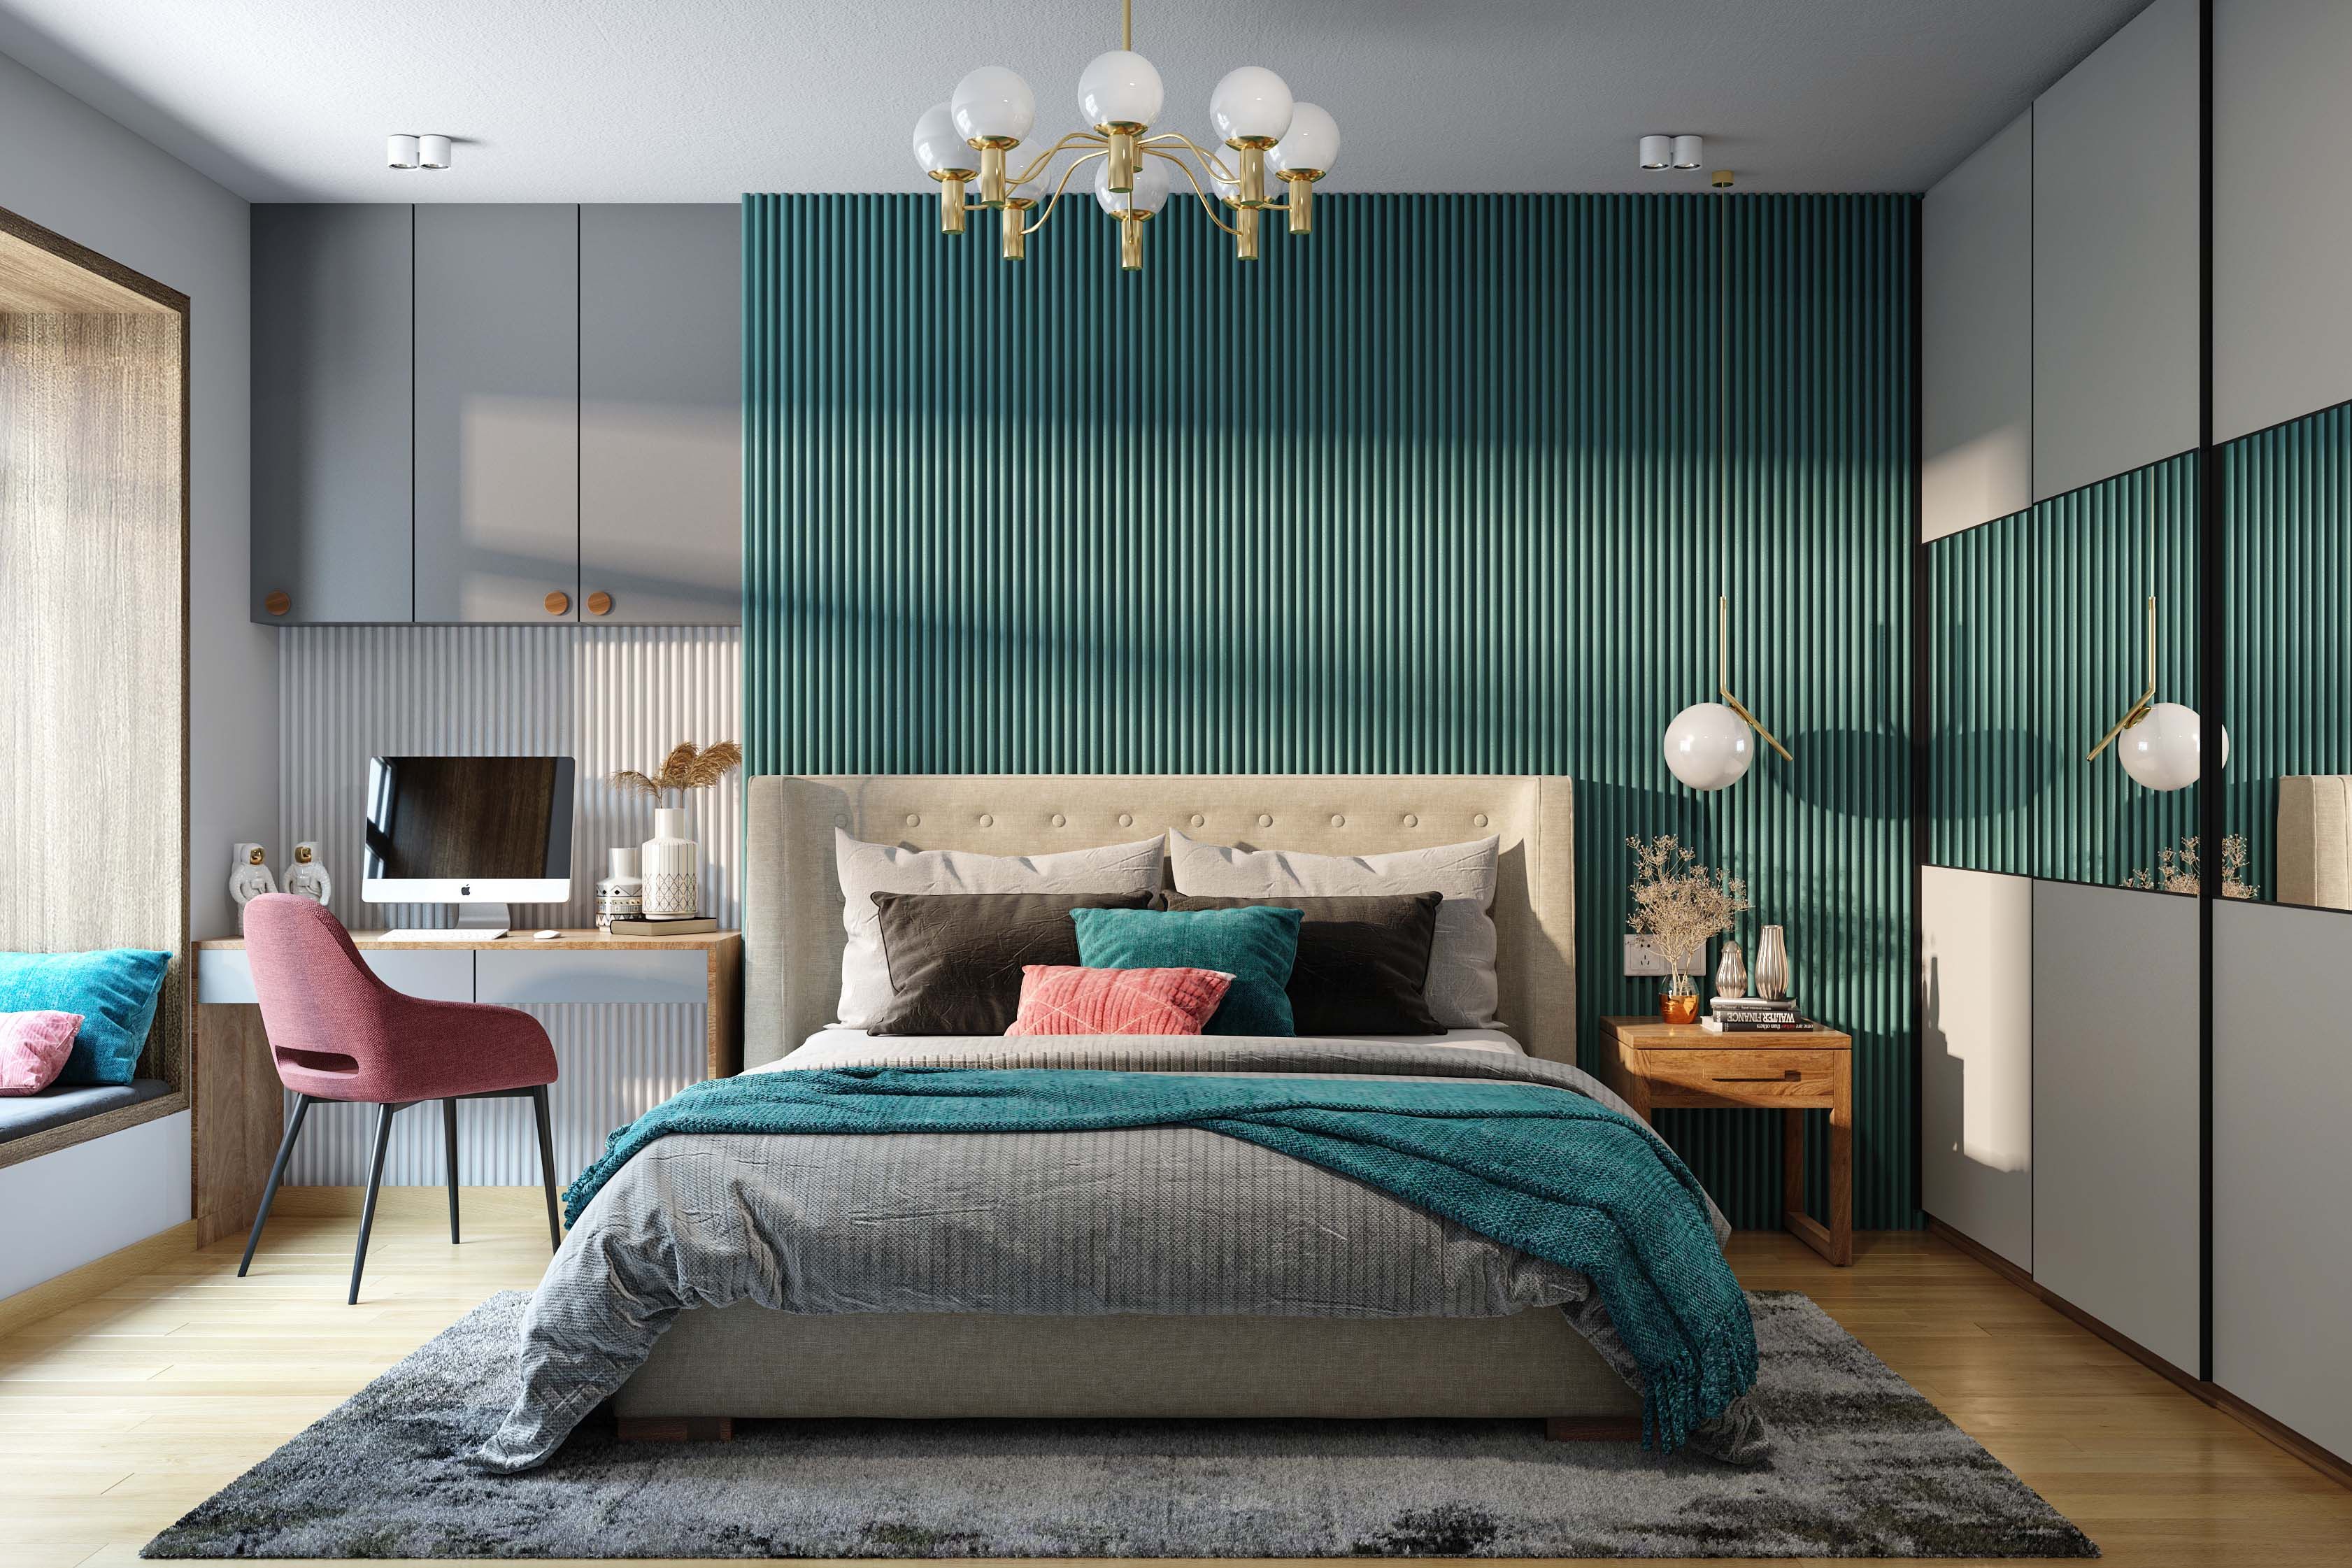 Contemporary Master Bedroom Design With Teal Fluted Panelled Accent Wall